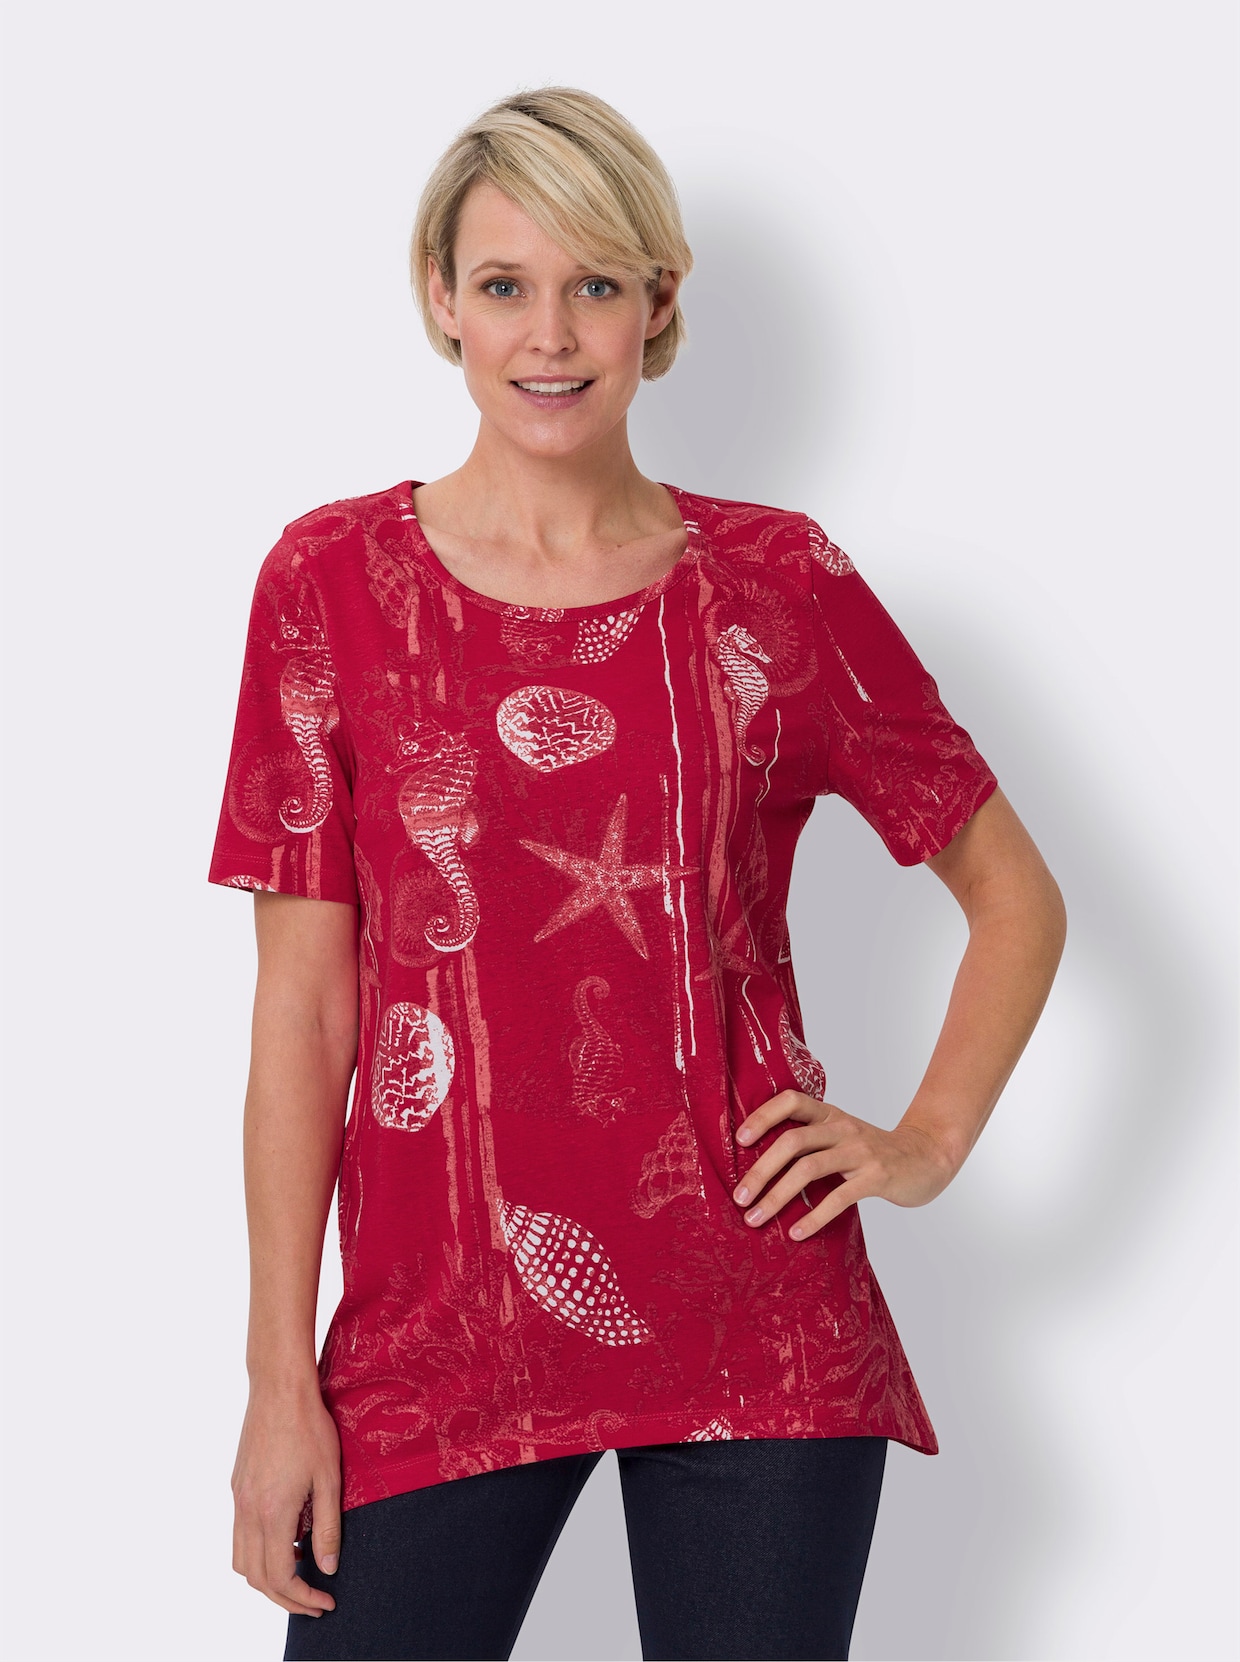 Puntig shirt - rood/wit geprint